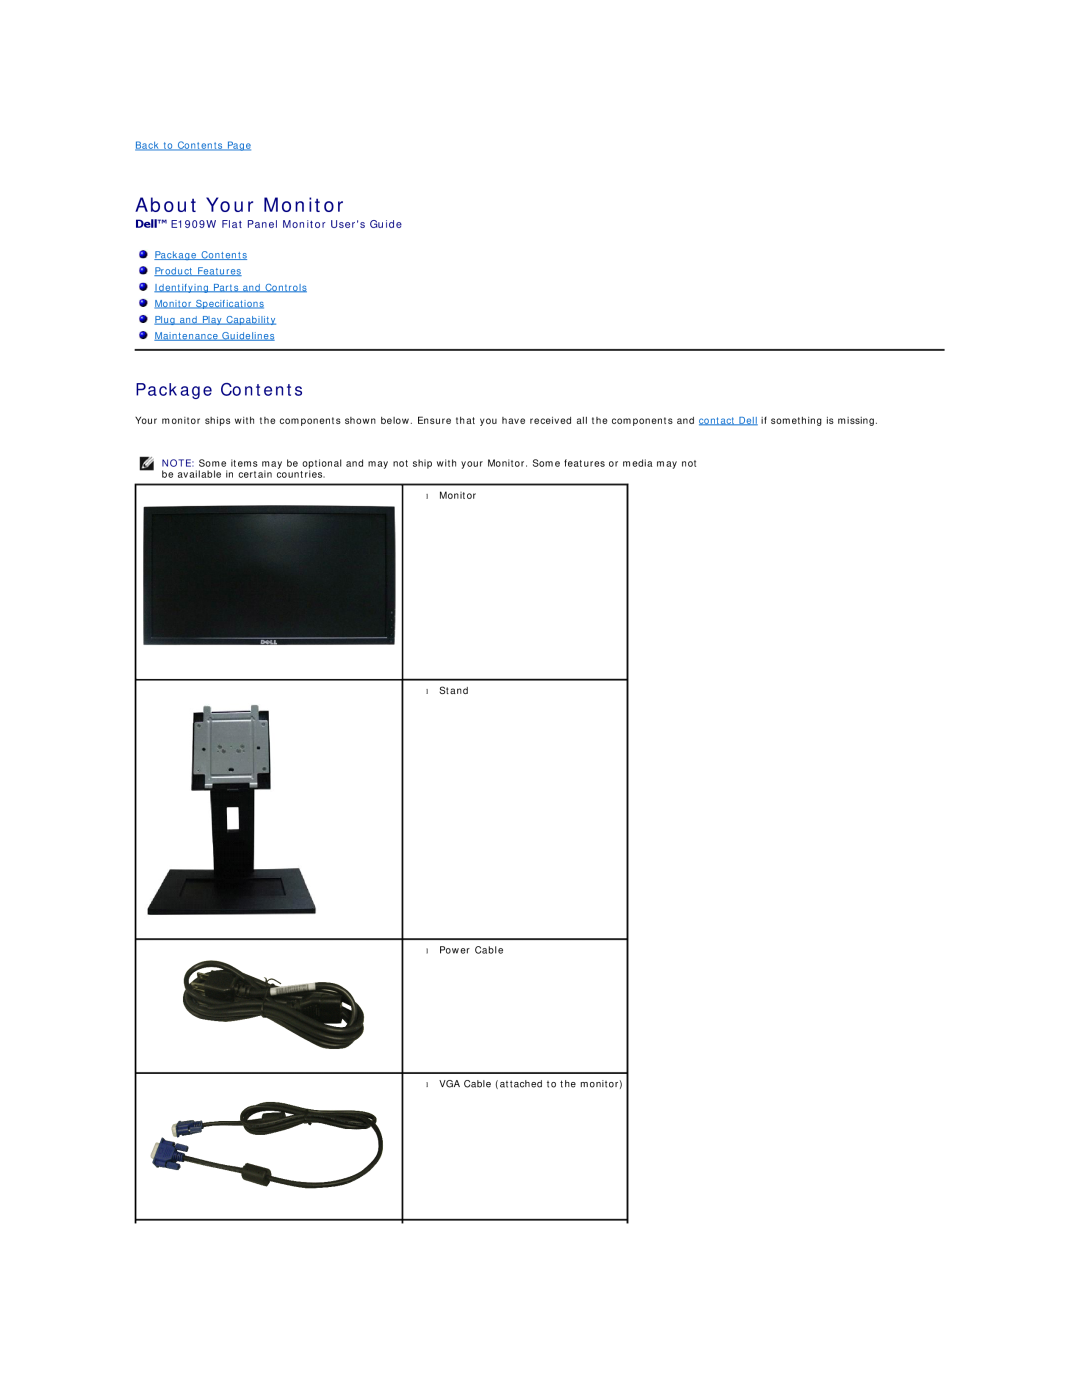 Dell appendix About Your Monitor, Package Contents, Dell E1909W Flat Panel Monitor Users Guide, Back to Contents Page 